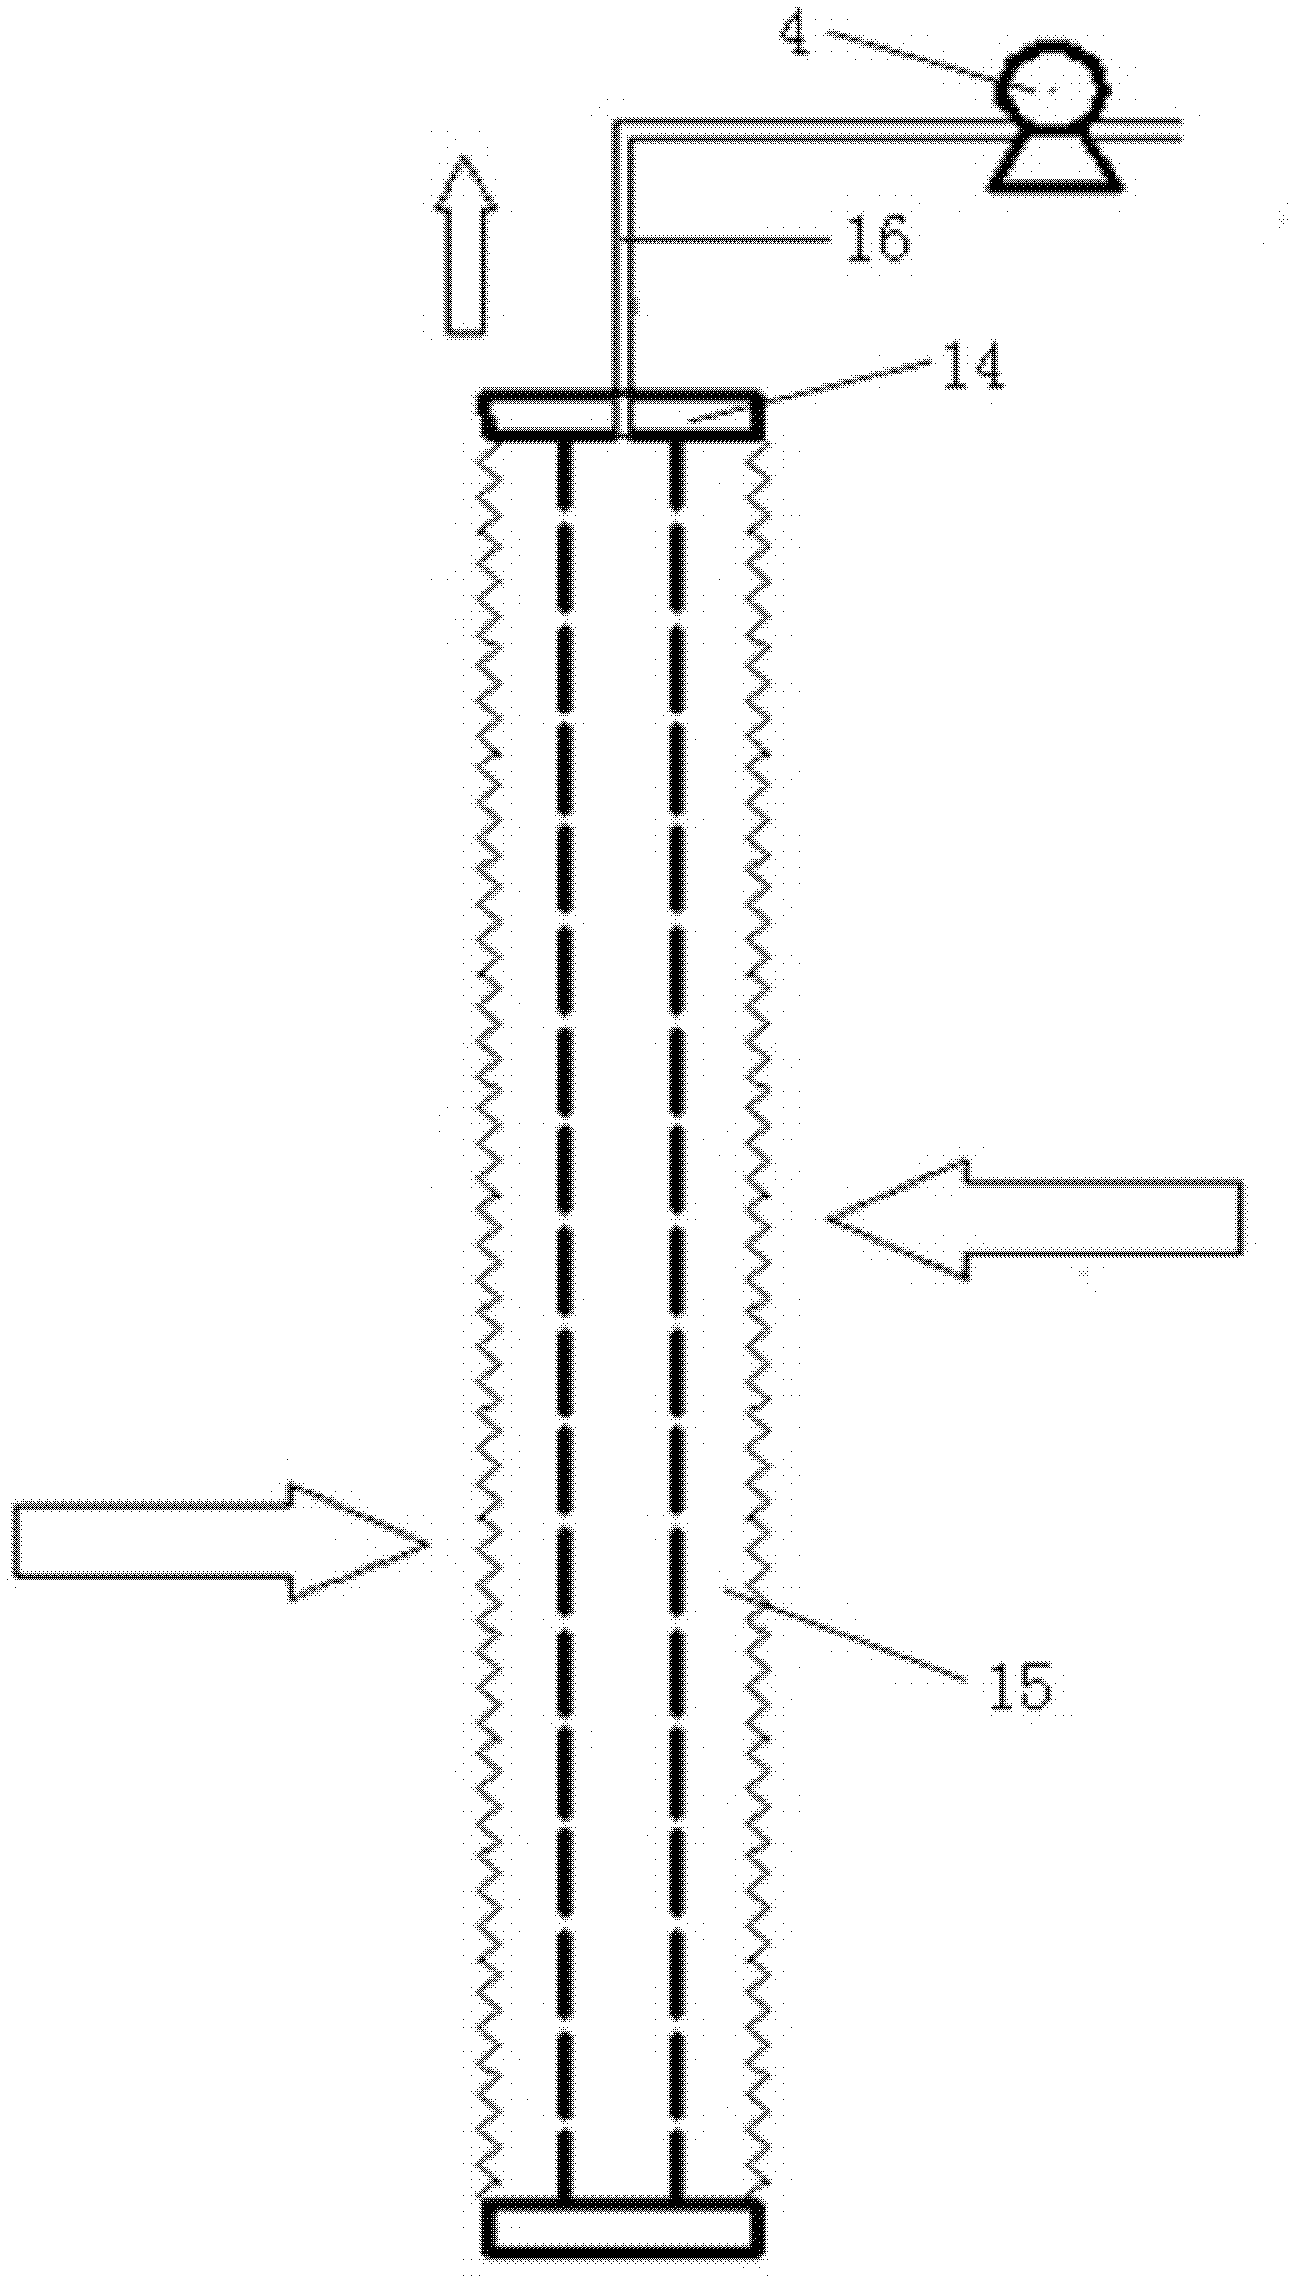 Biological membrane-activated sludge composite membrane bioreactor for denitrification and water treatment method using same